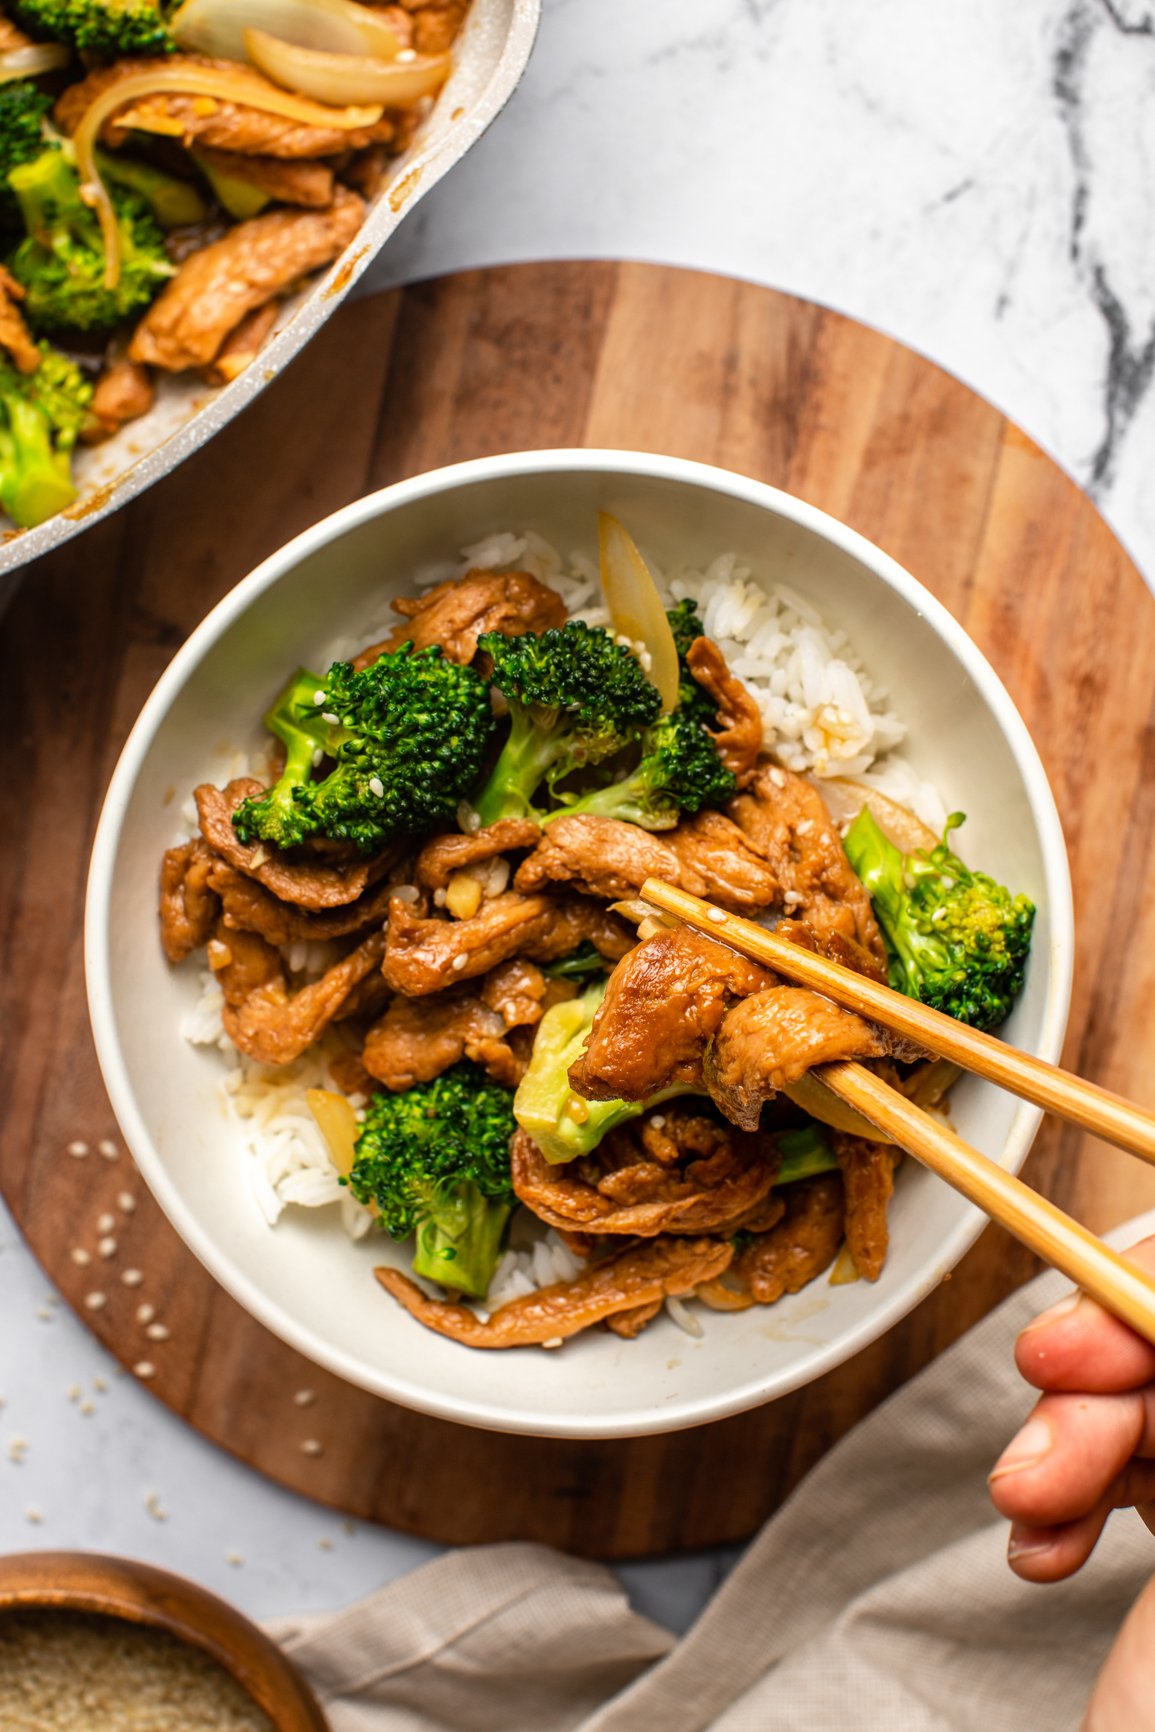 hand using chopsticks to pick up pieces of vegan "beef" from bowl of vegan beef and broccoli